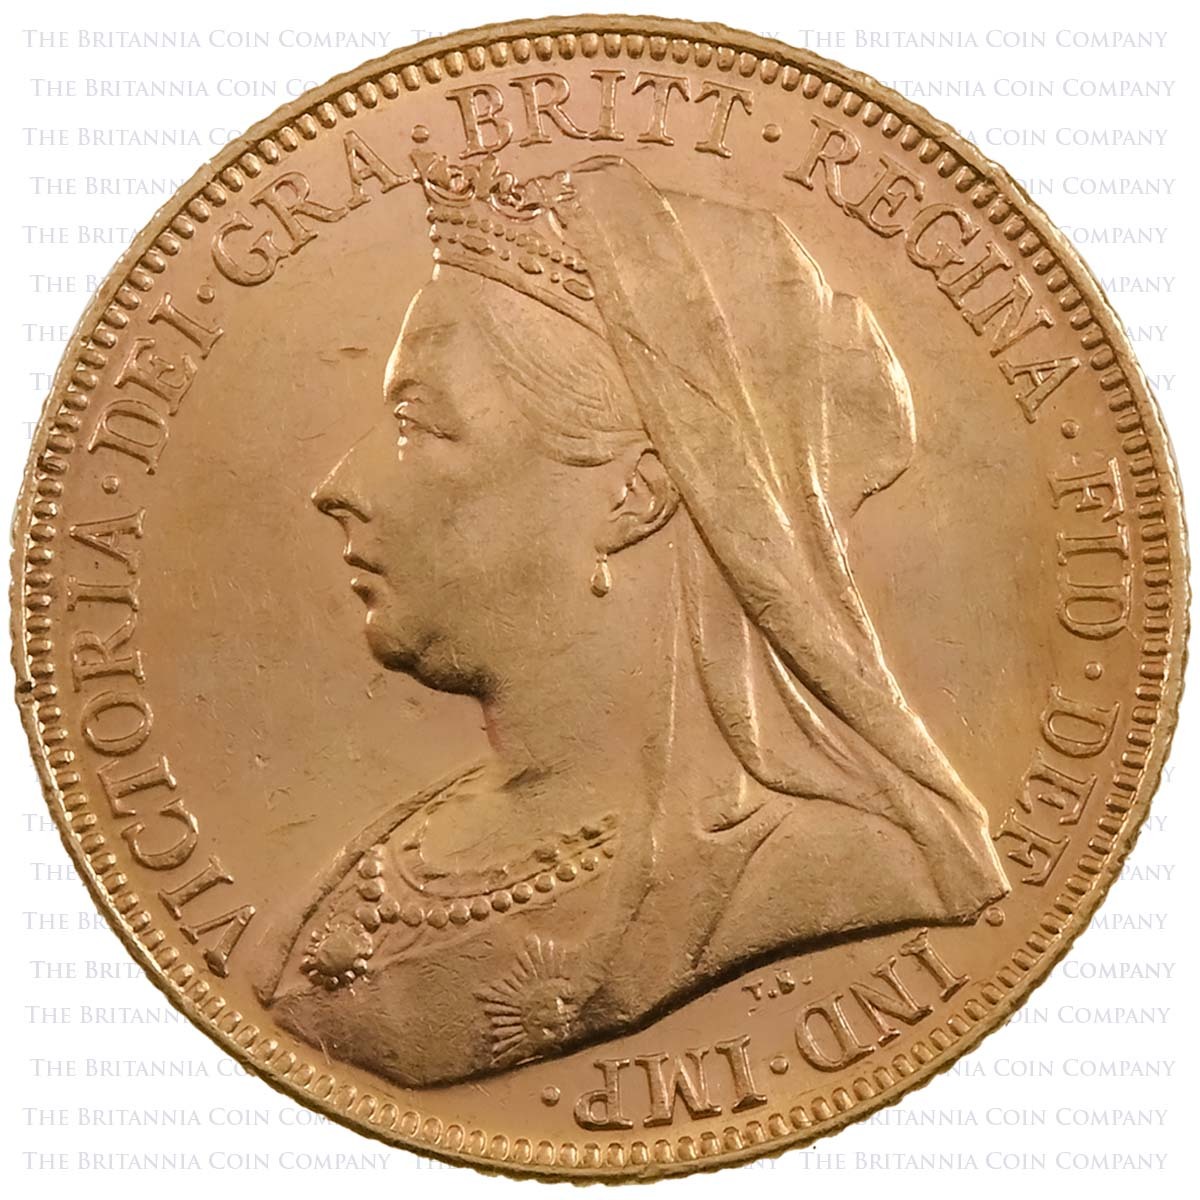 1899 Queen Victoria Gold Full Sovereign Old Veiled Widowed Head Melbourne Mint Australia Obverse